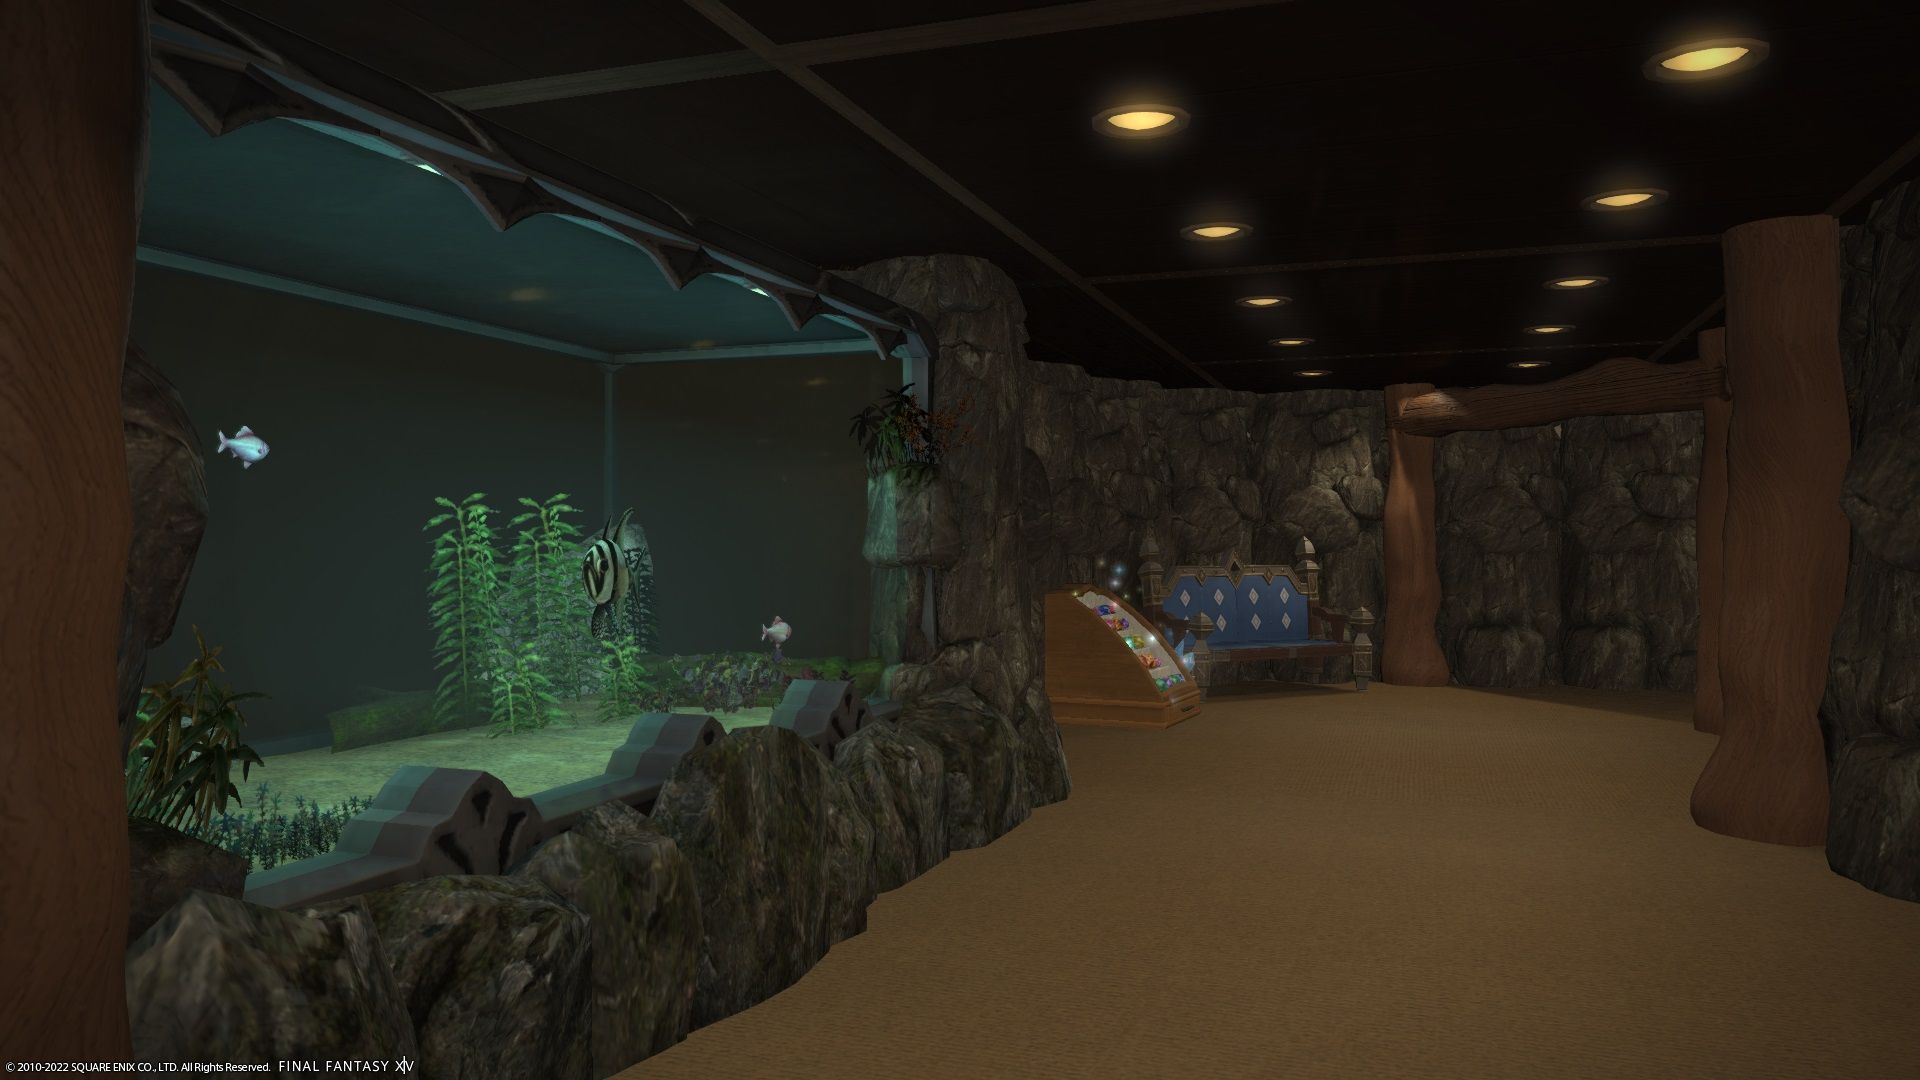 The Final Fantasy 14 Nature Museum Cave Room